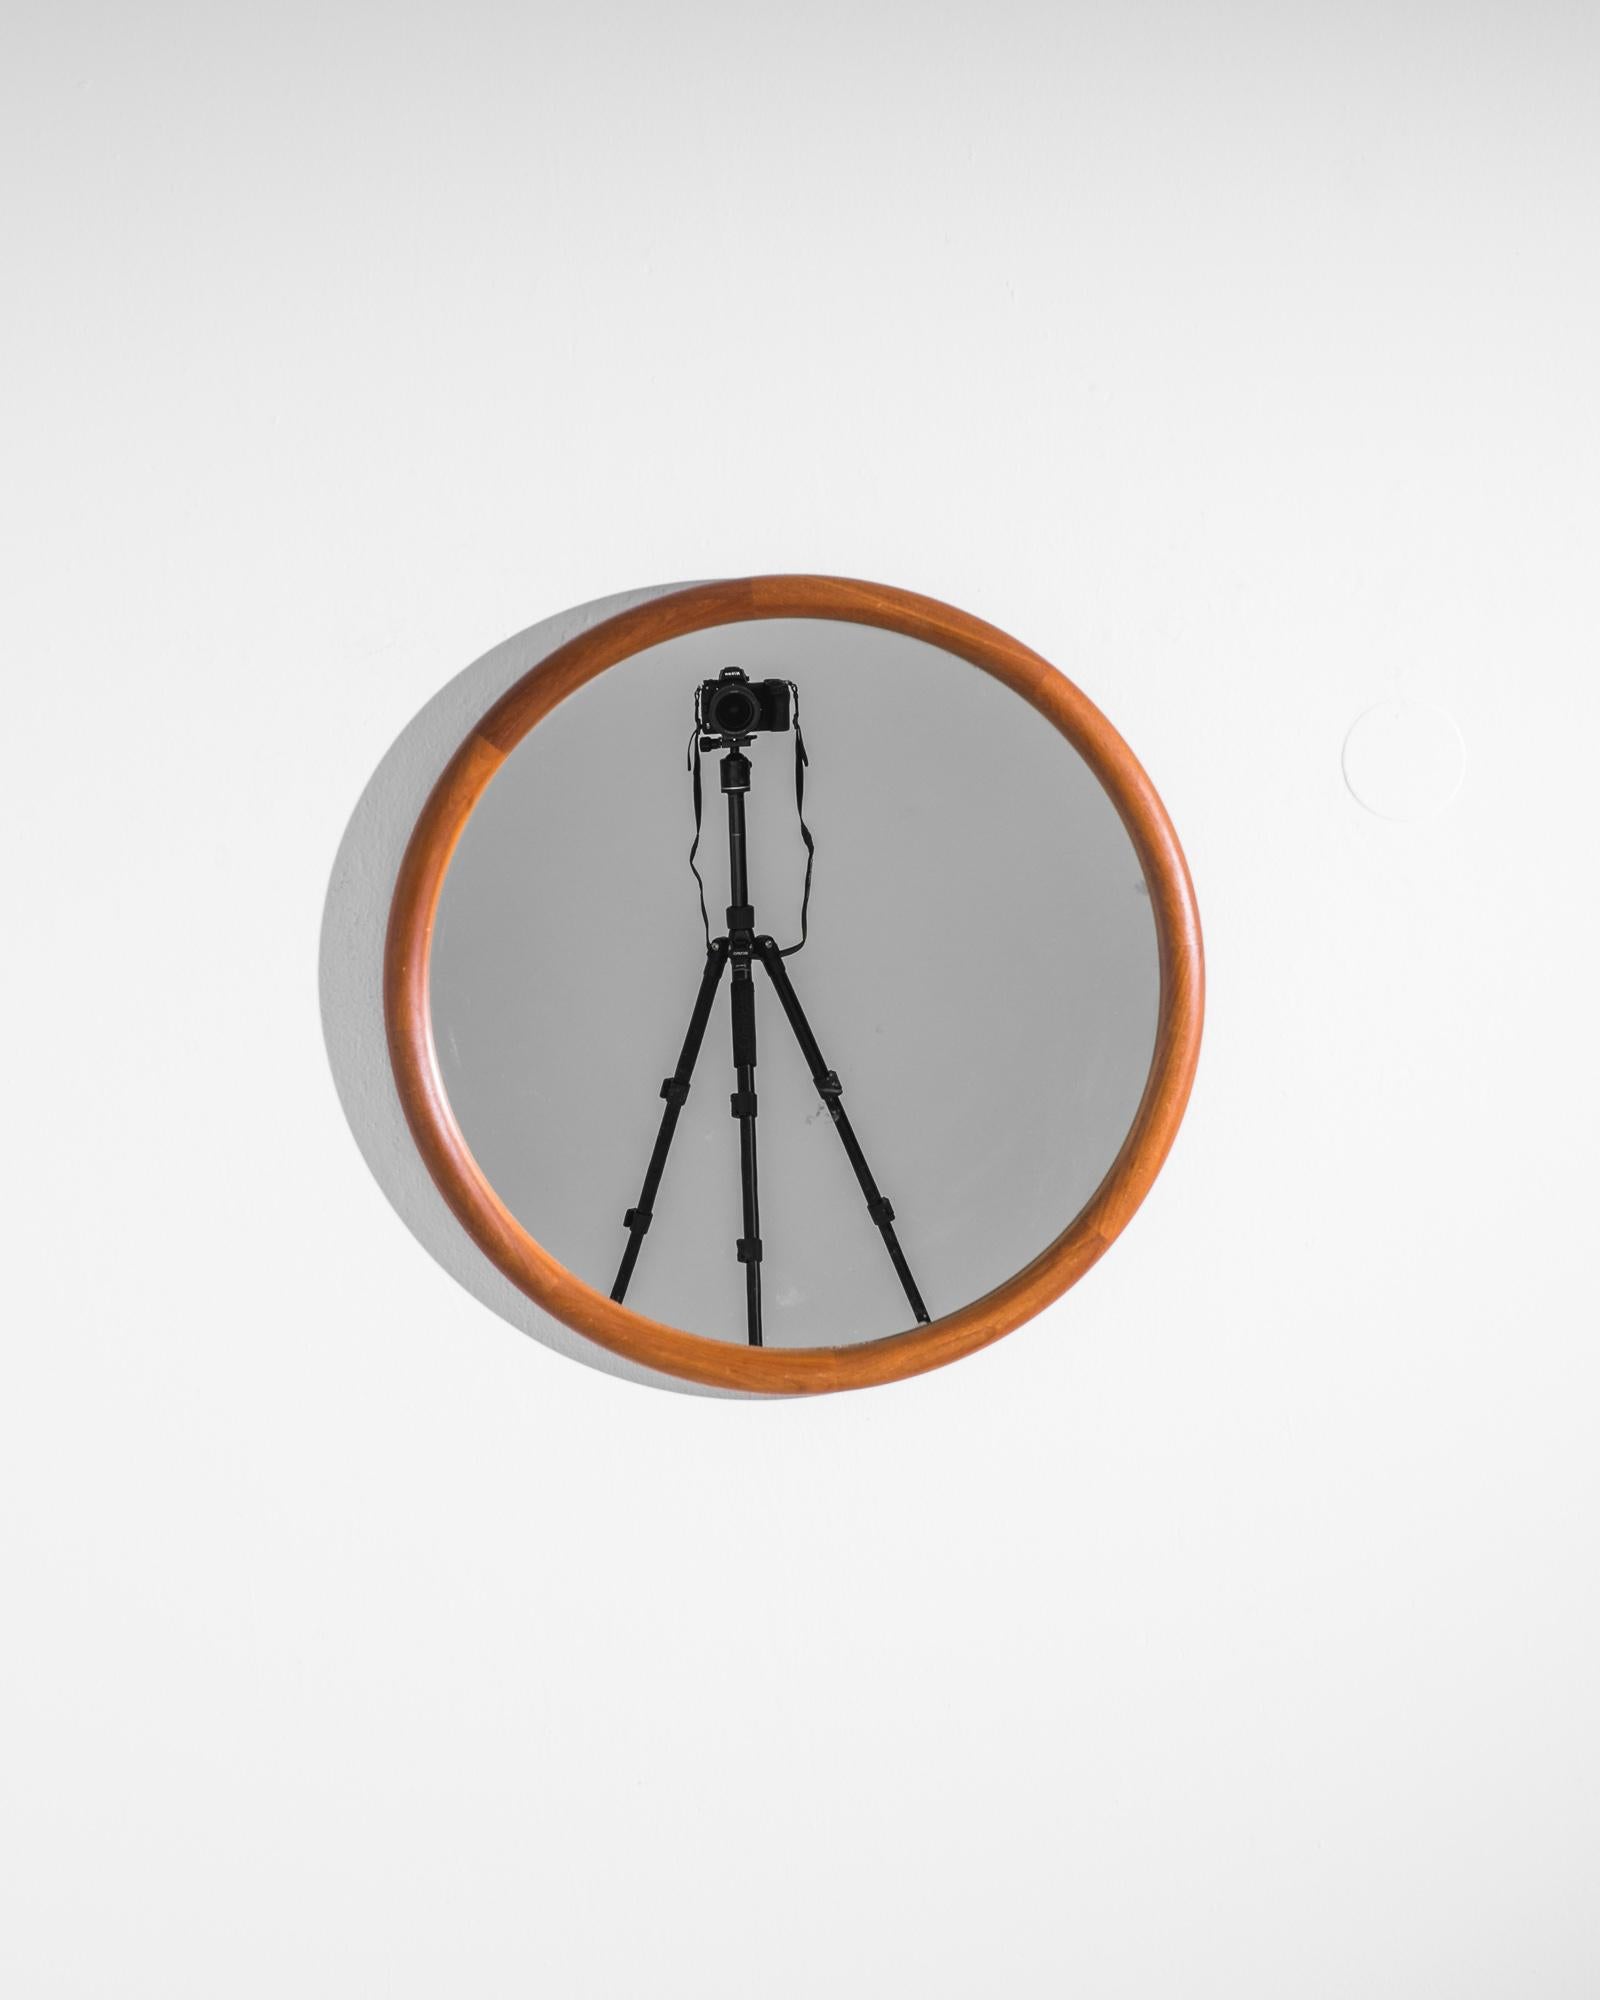 This stylish Mid-Century Modern mirror made in Denmark circa 1960 flaunts immaculate circularity, the teak frame merging into glass like a lunar eclipse. Exuding the charm of Nordic simplicity, this vintage mirror easily adapts to contemporary